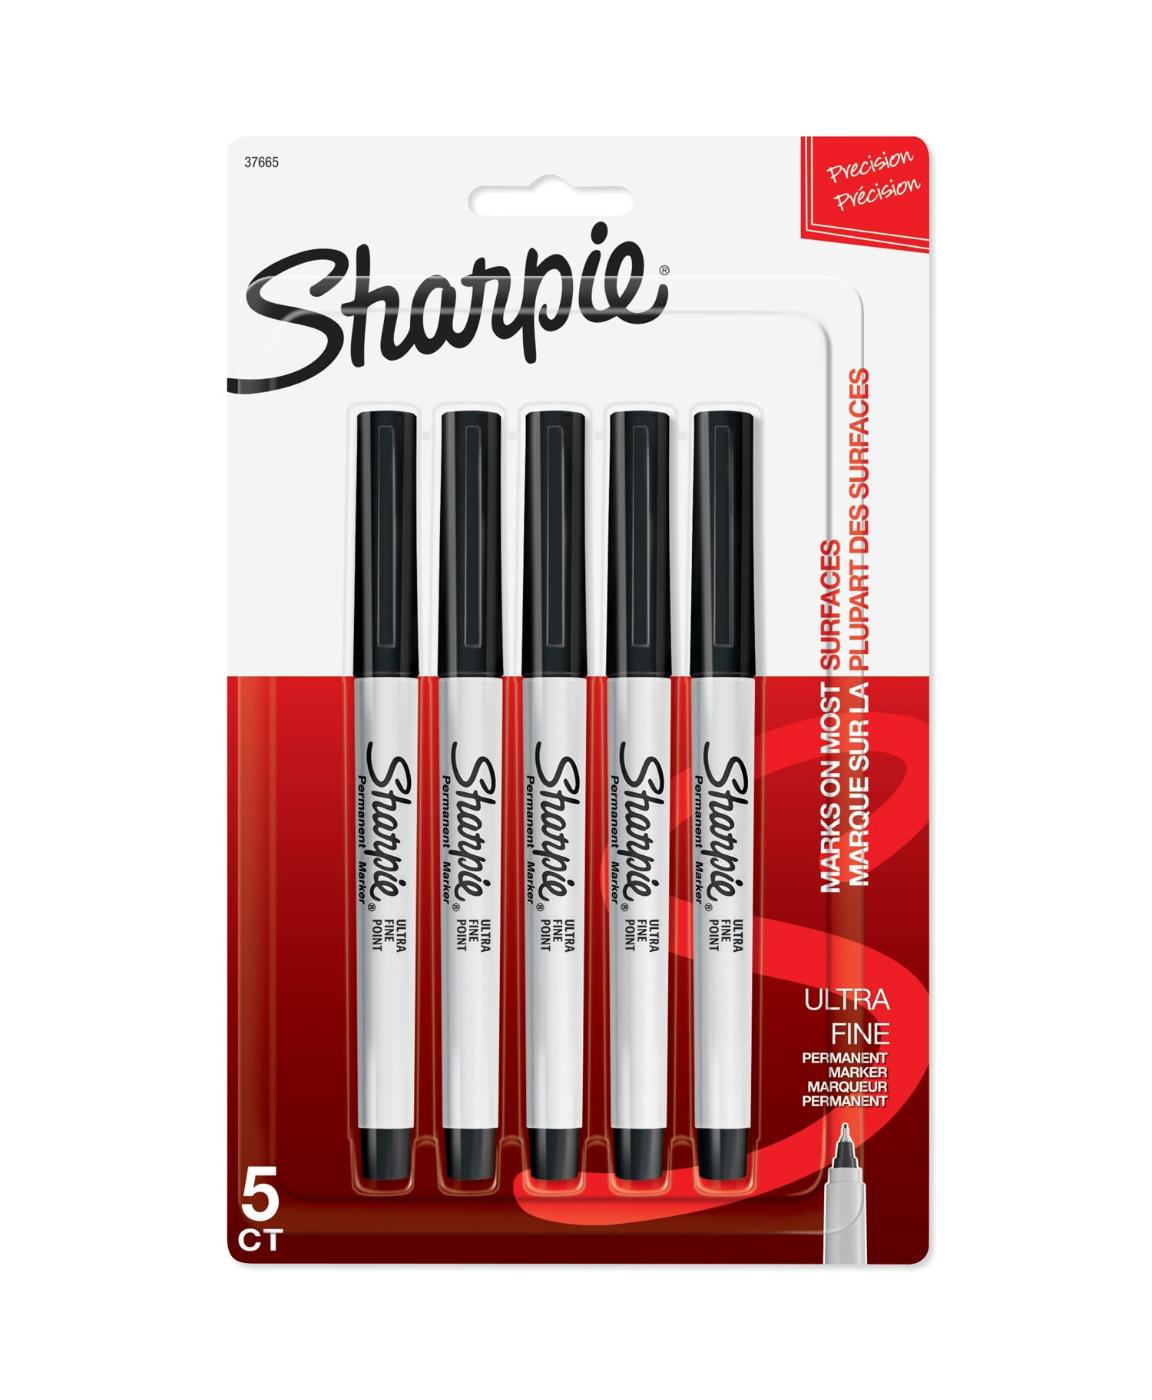  SHARPIE Ultra-Fine Point Permanent Marker, Black, 12 Count  (37001) : Office Products